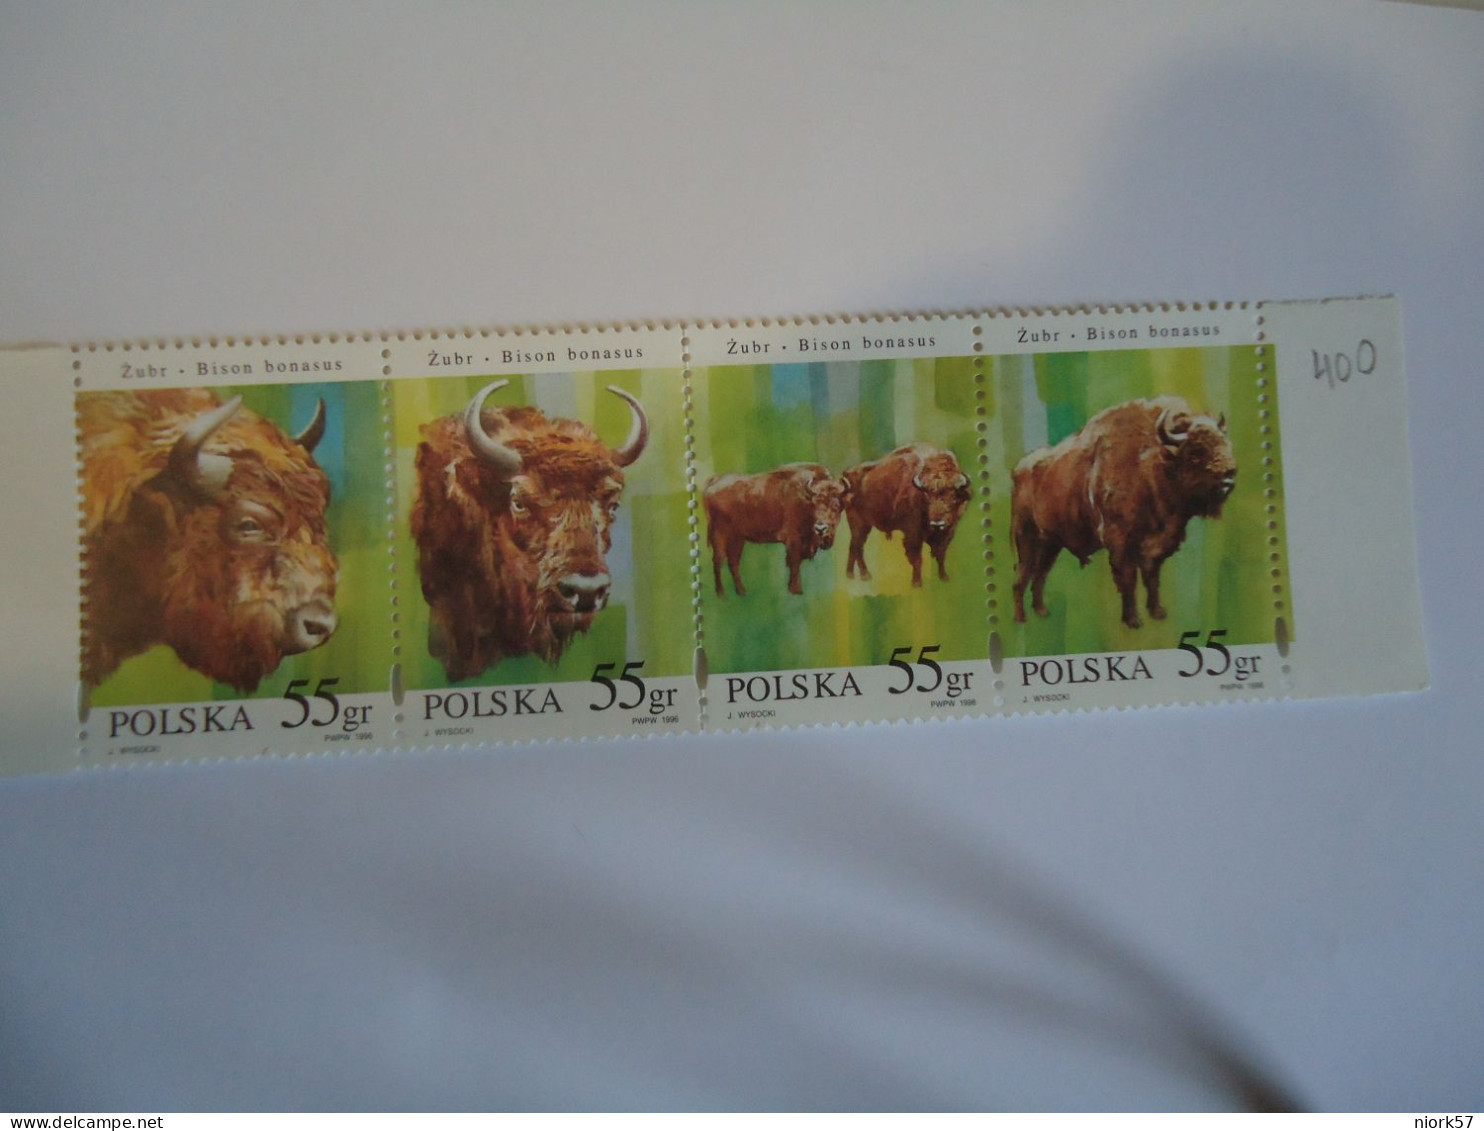 POLAND MNH  STAMPS SE TENANT4 ANIMALS  BISON  1996 - Cows